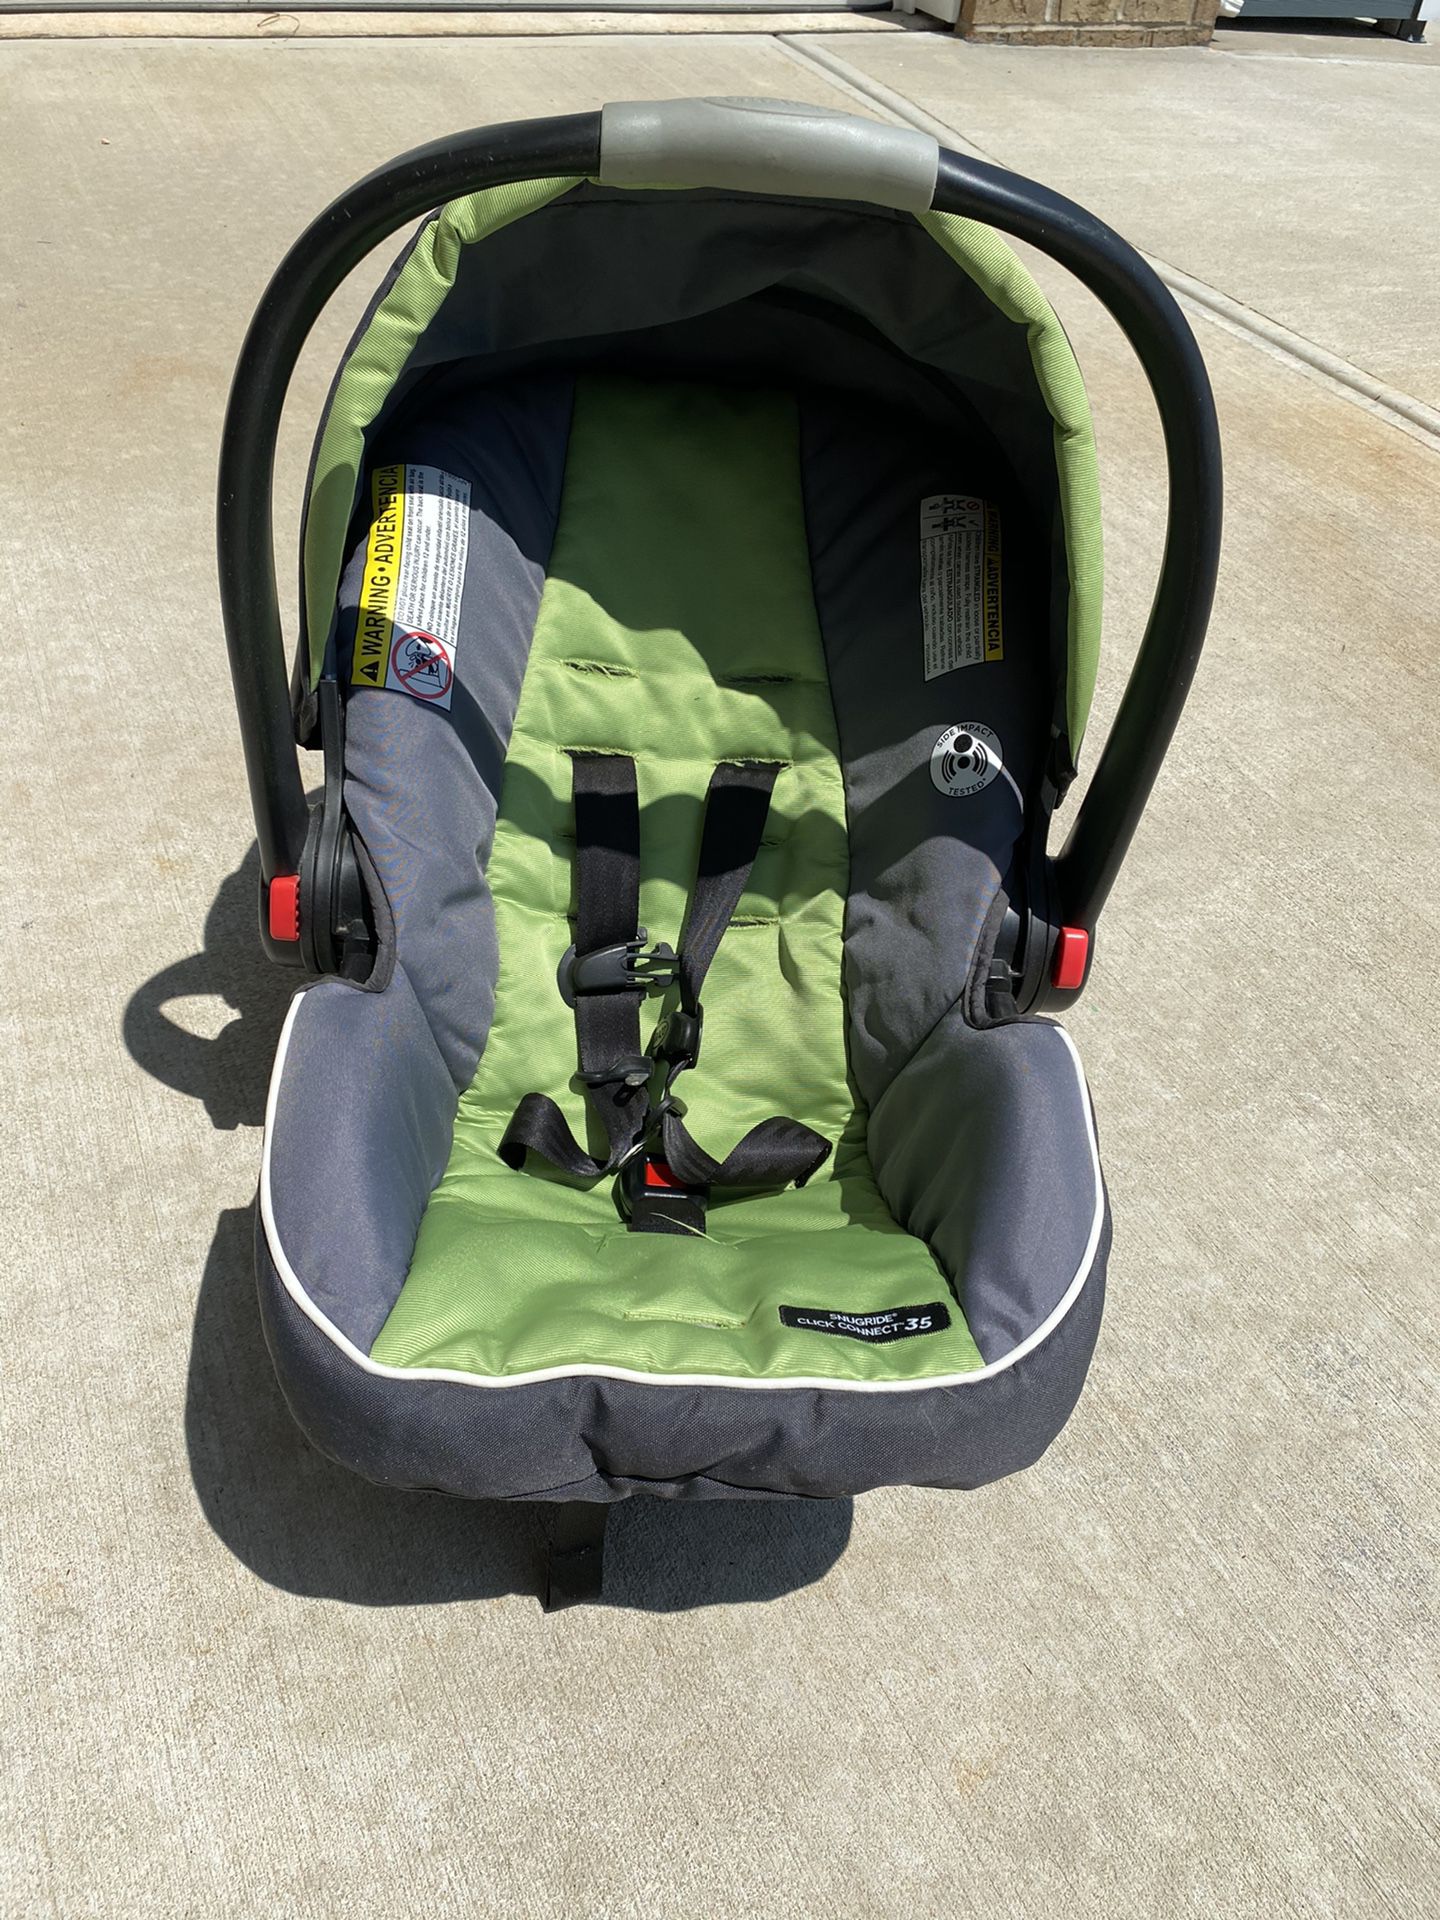 Graco infant car seat with car seat stroller with infant inserts